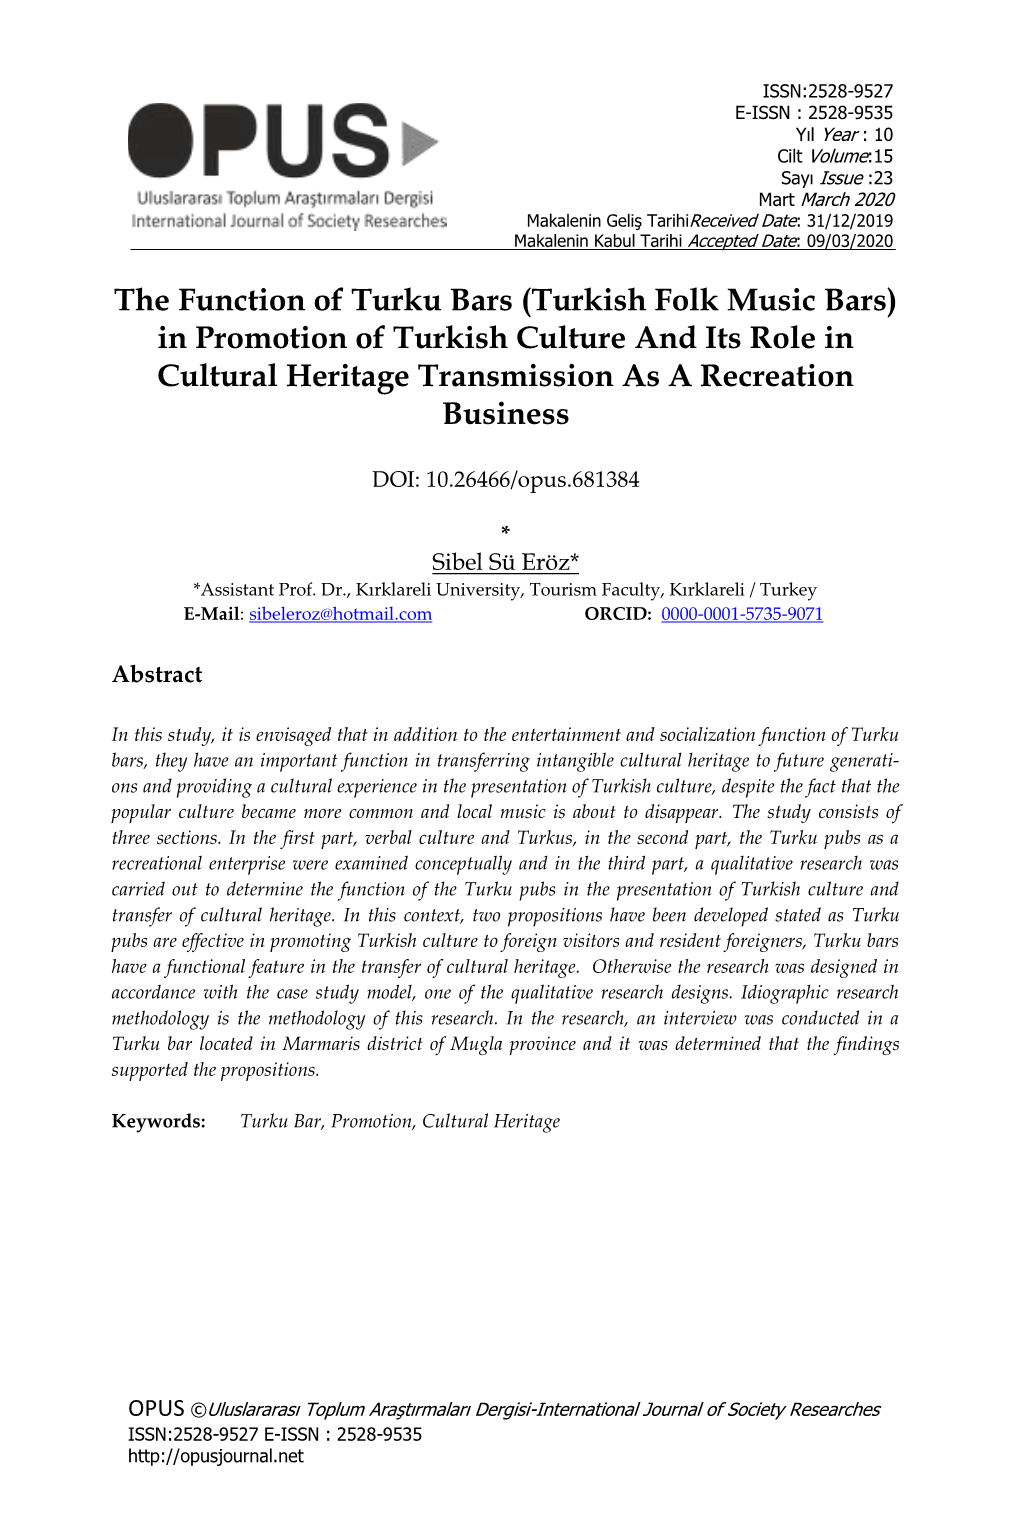 Turkish Folk Music Bars) in Promotion of Turkish Culture and Its Role in Cultural Heritage Transmission As a Recreation Business